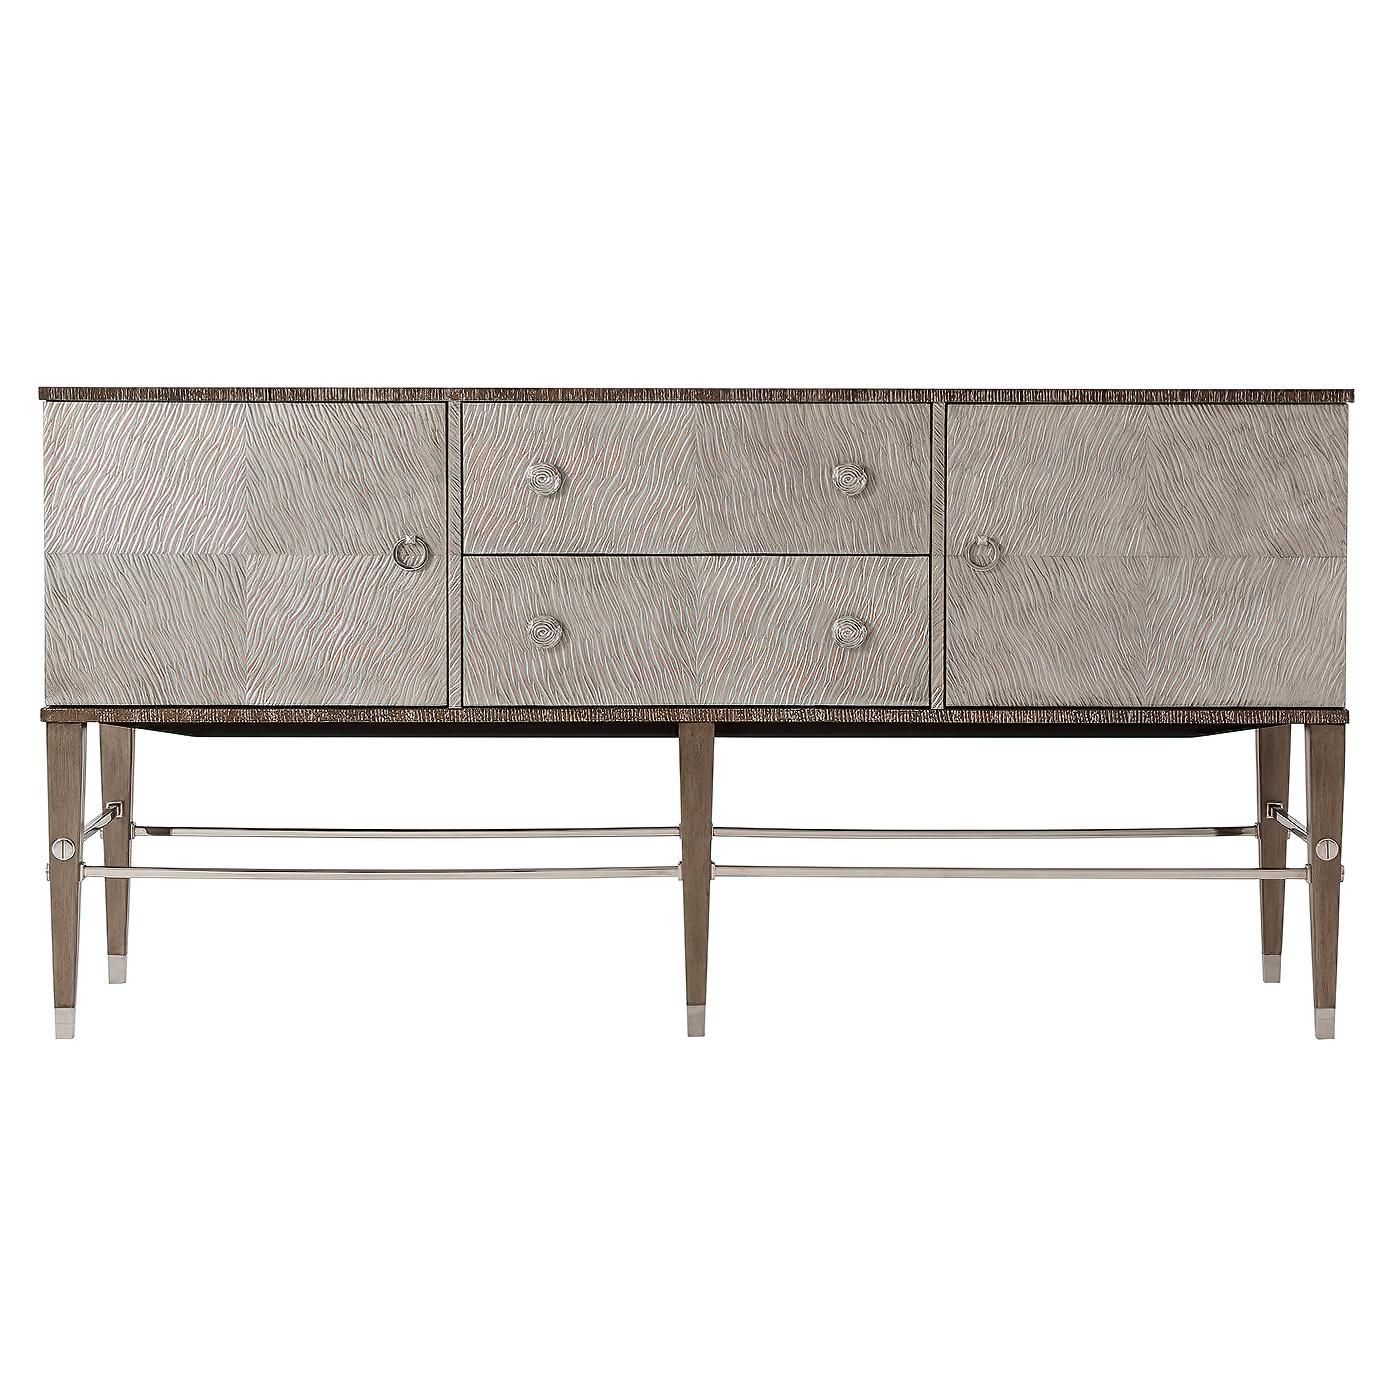 Modern Cerused quartered oak cabinet with two mercury finish embossed leather drawers and doors, stainless steel handles, and stretchers on hand leafed brushed pewter legs.
Dimensions: 72